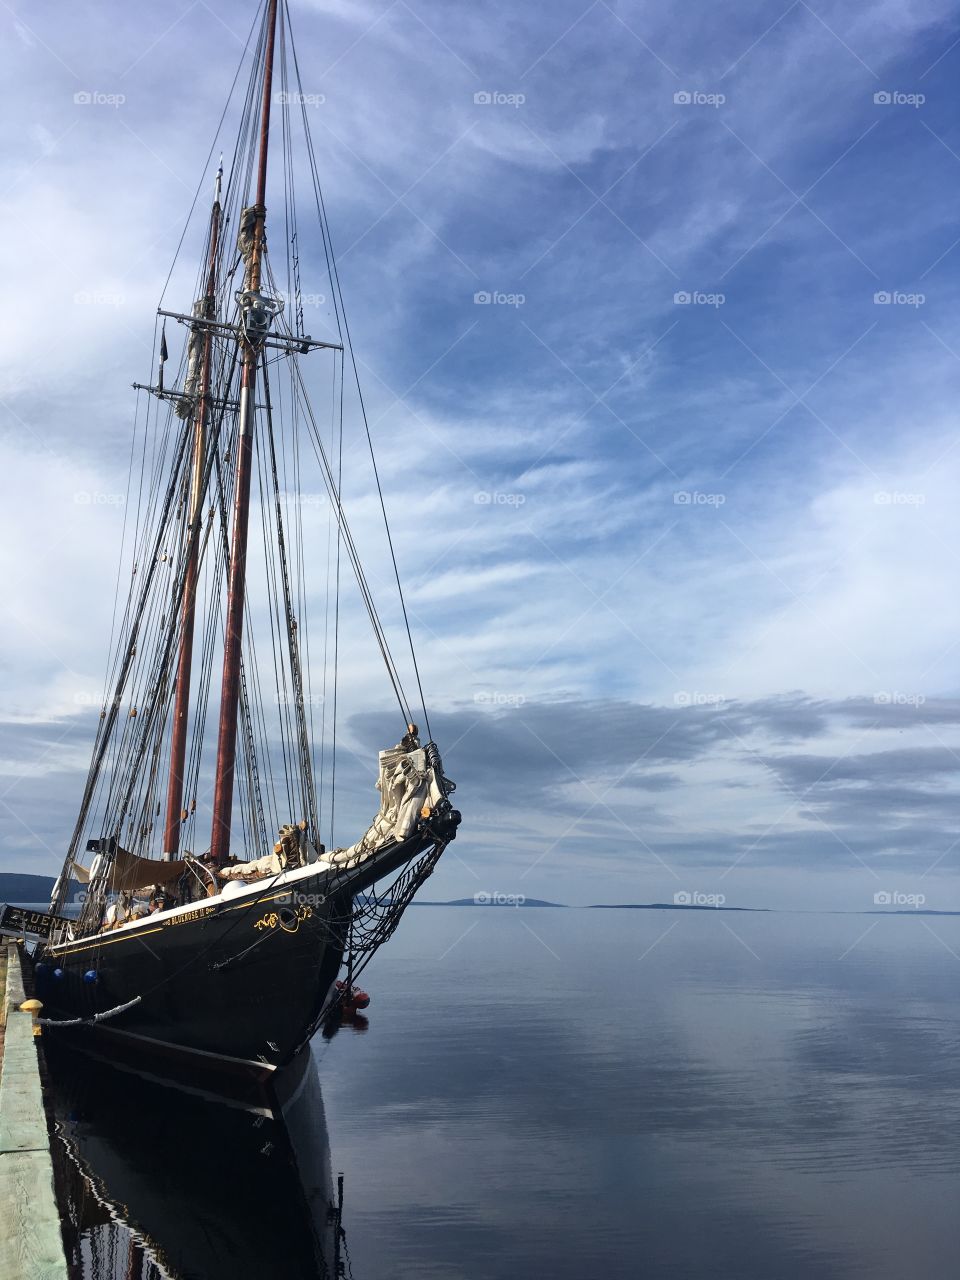 The legendary Bluenose II sailboat docked in a lake of calm water. 